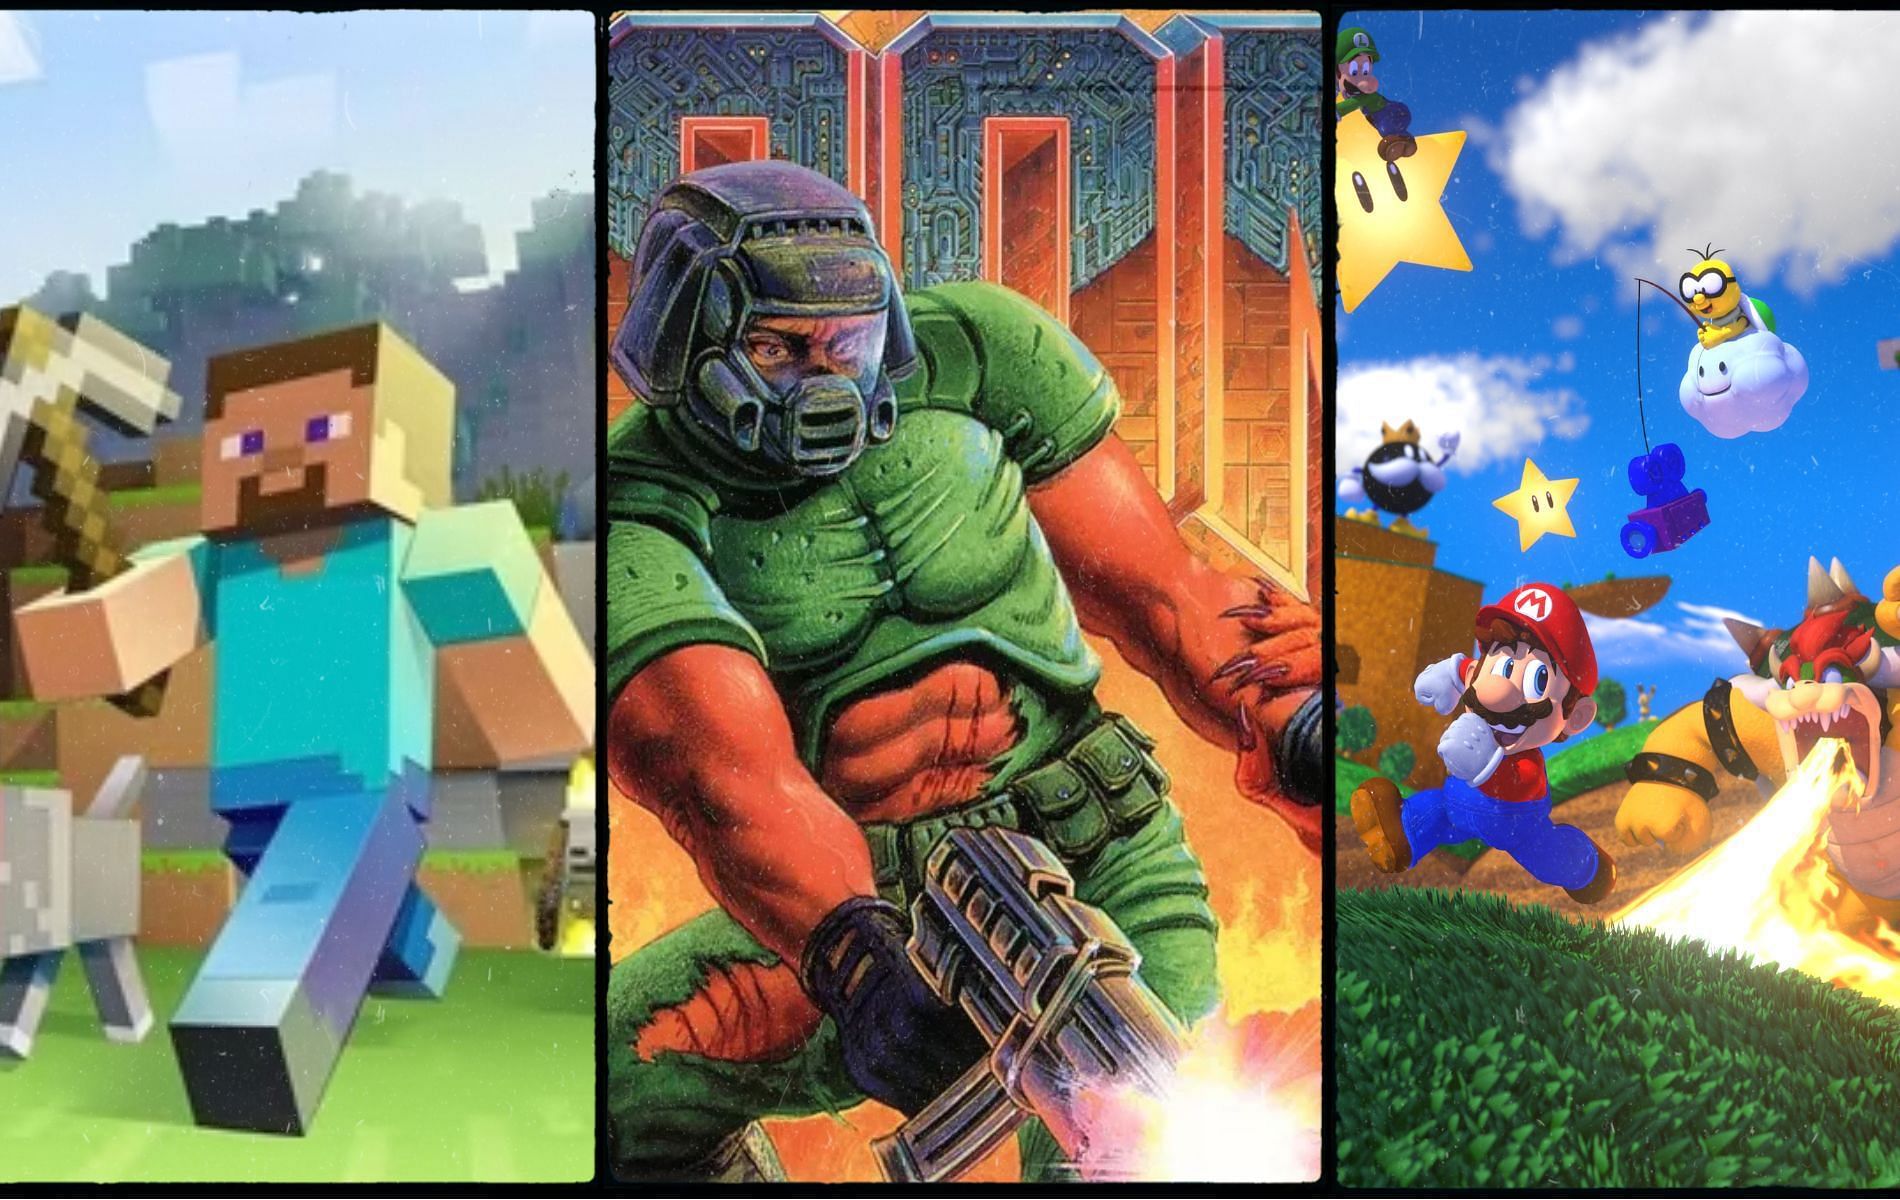 5 video games that changed the industry forever